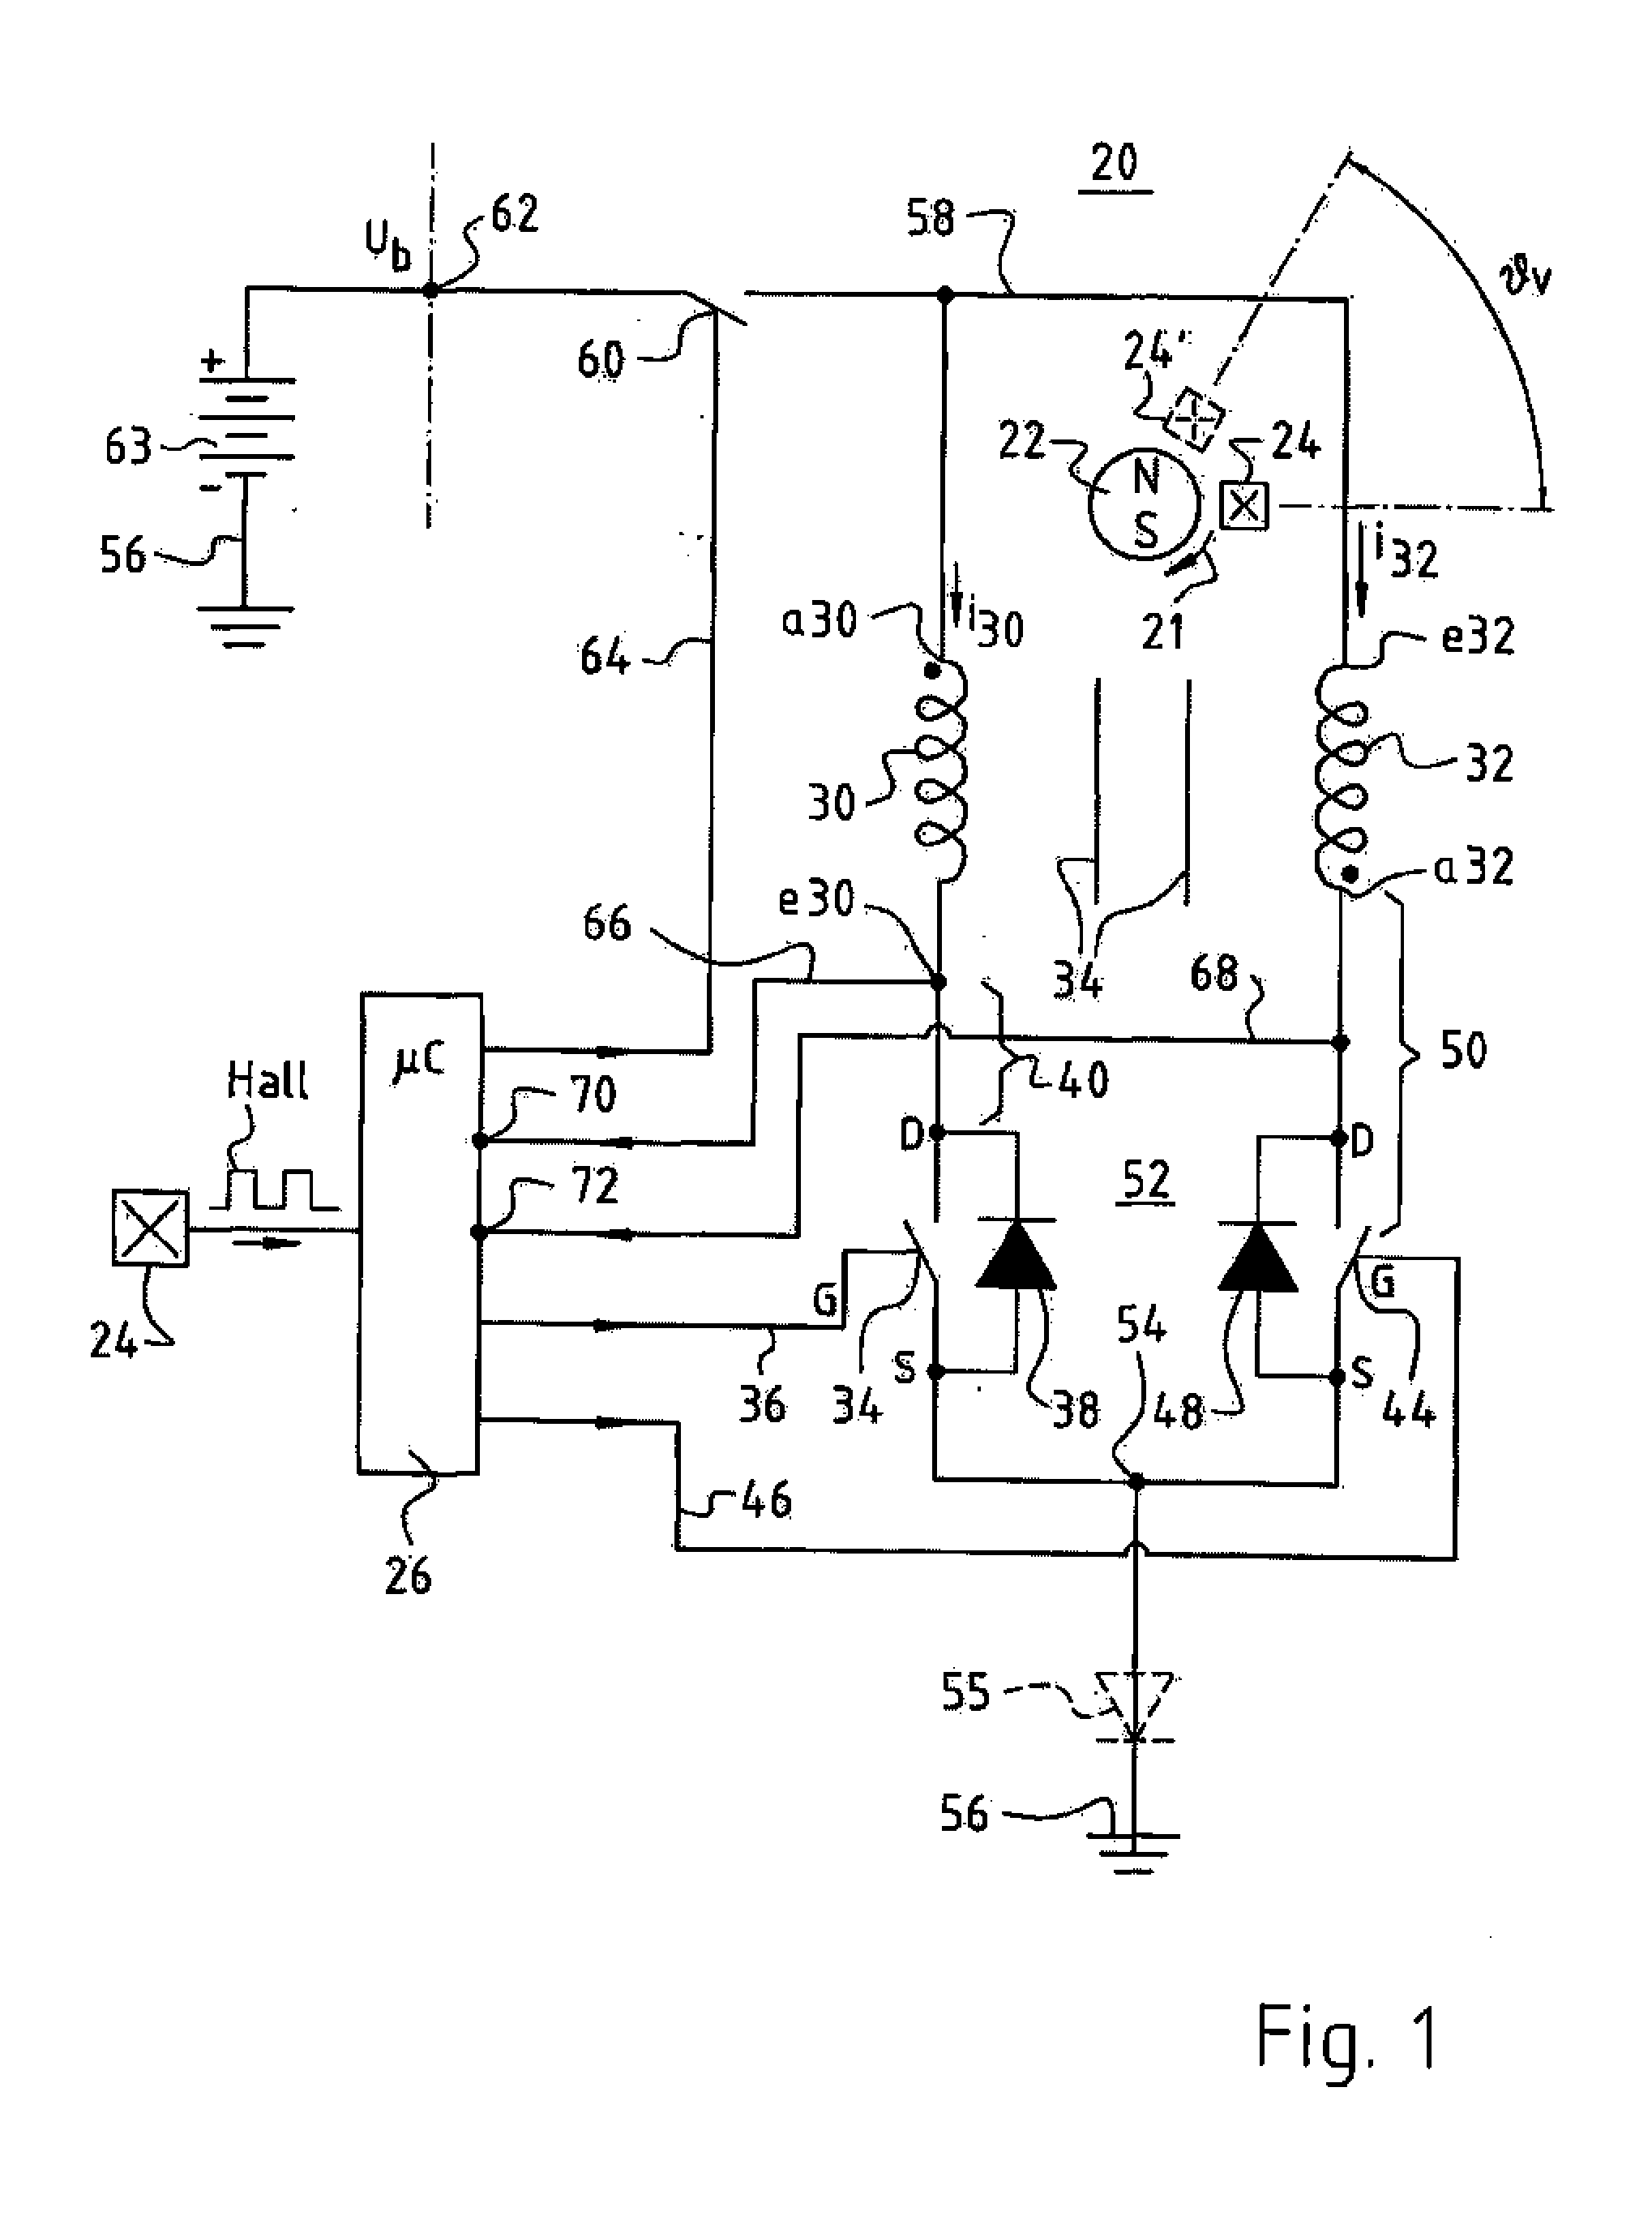 Method for Operating an Electronically Commutated Motor, and Motor for Carrying Out a Method Such as This